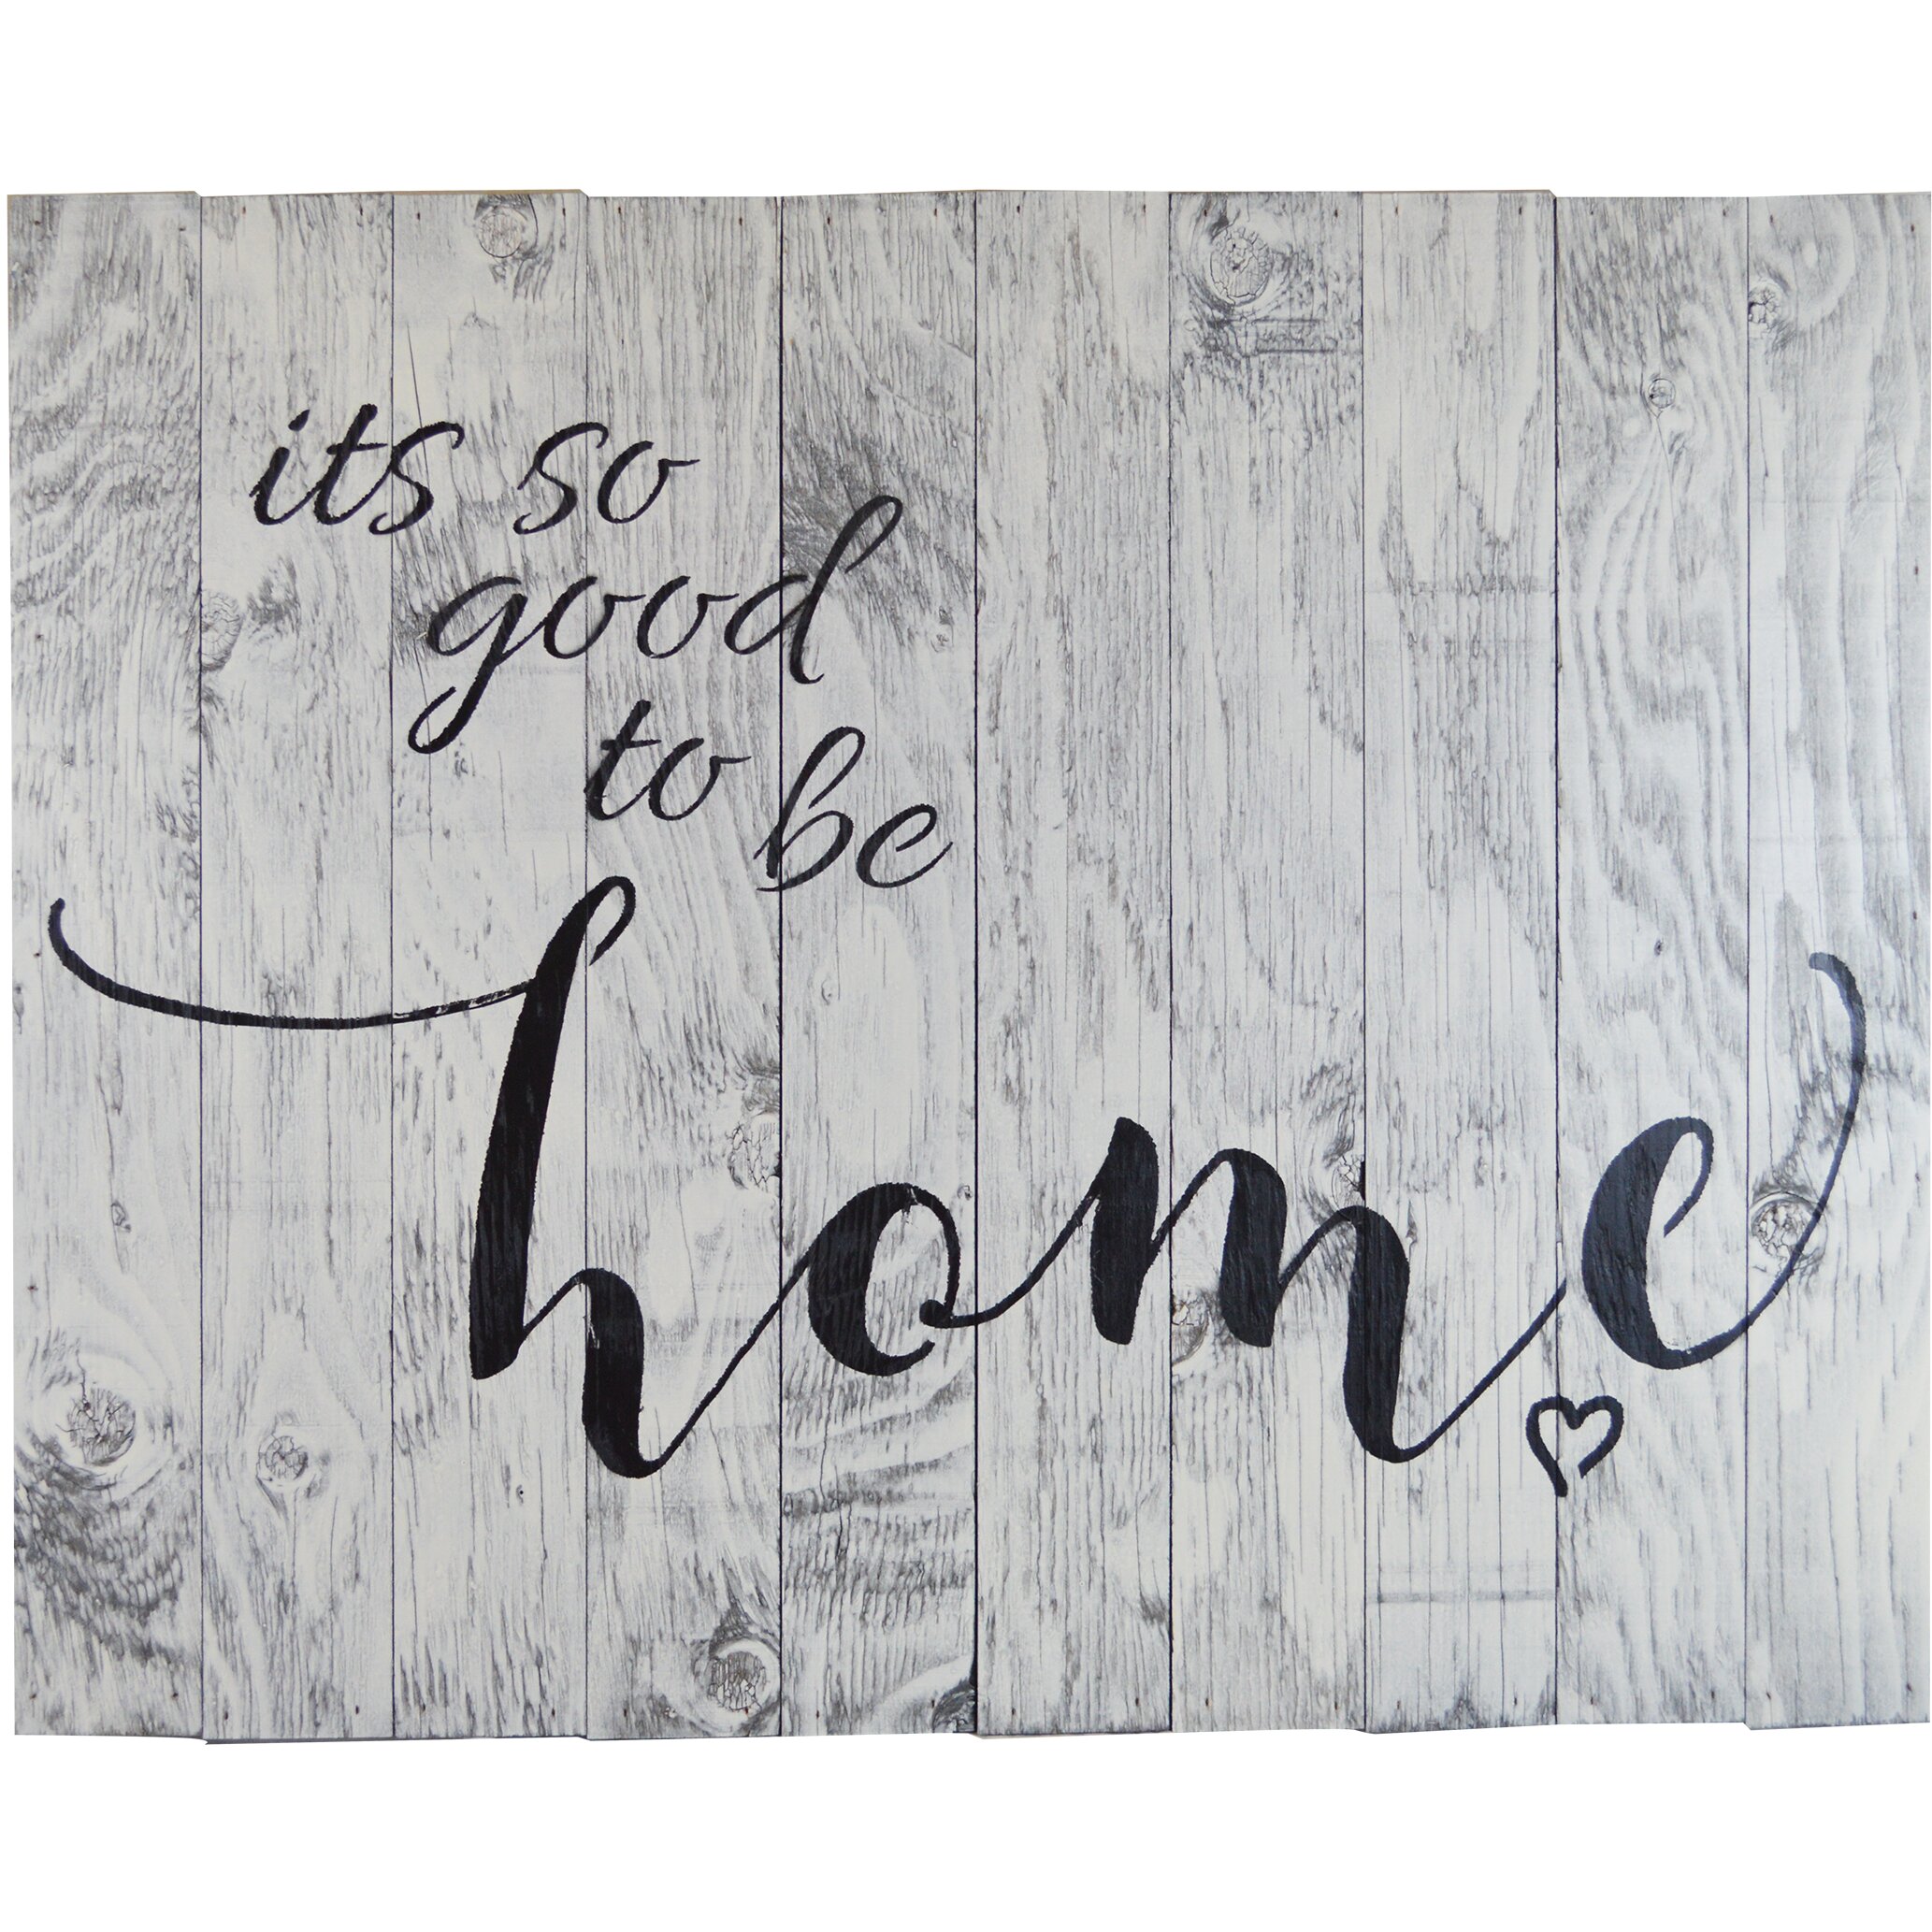 Download FiresideHome 'Its so Good to Be Home' Textual Art on ...